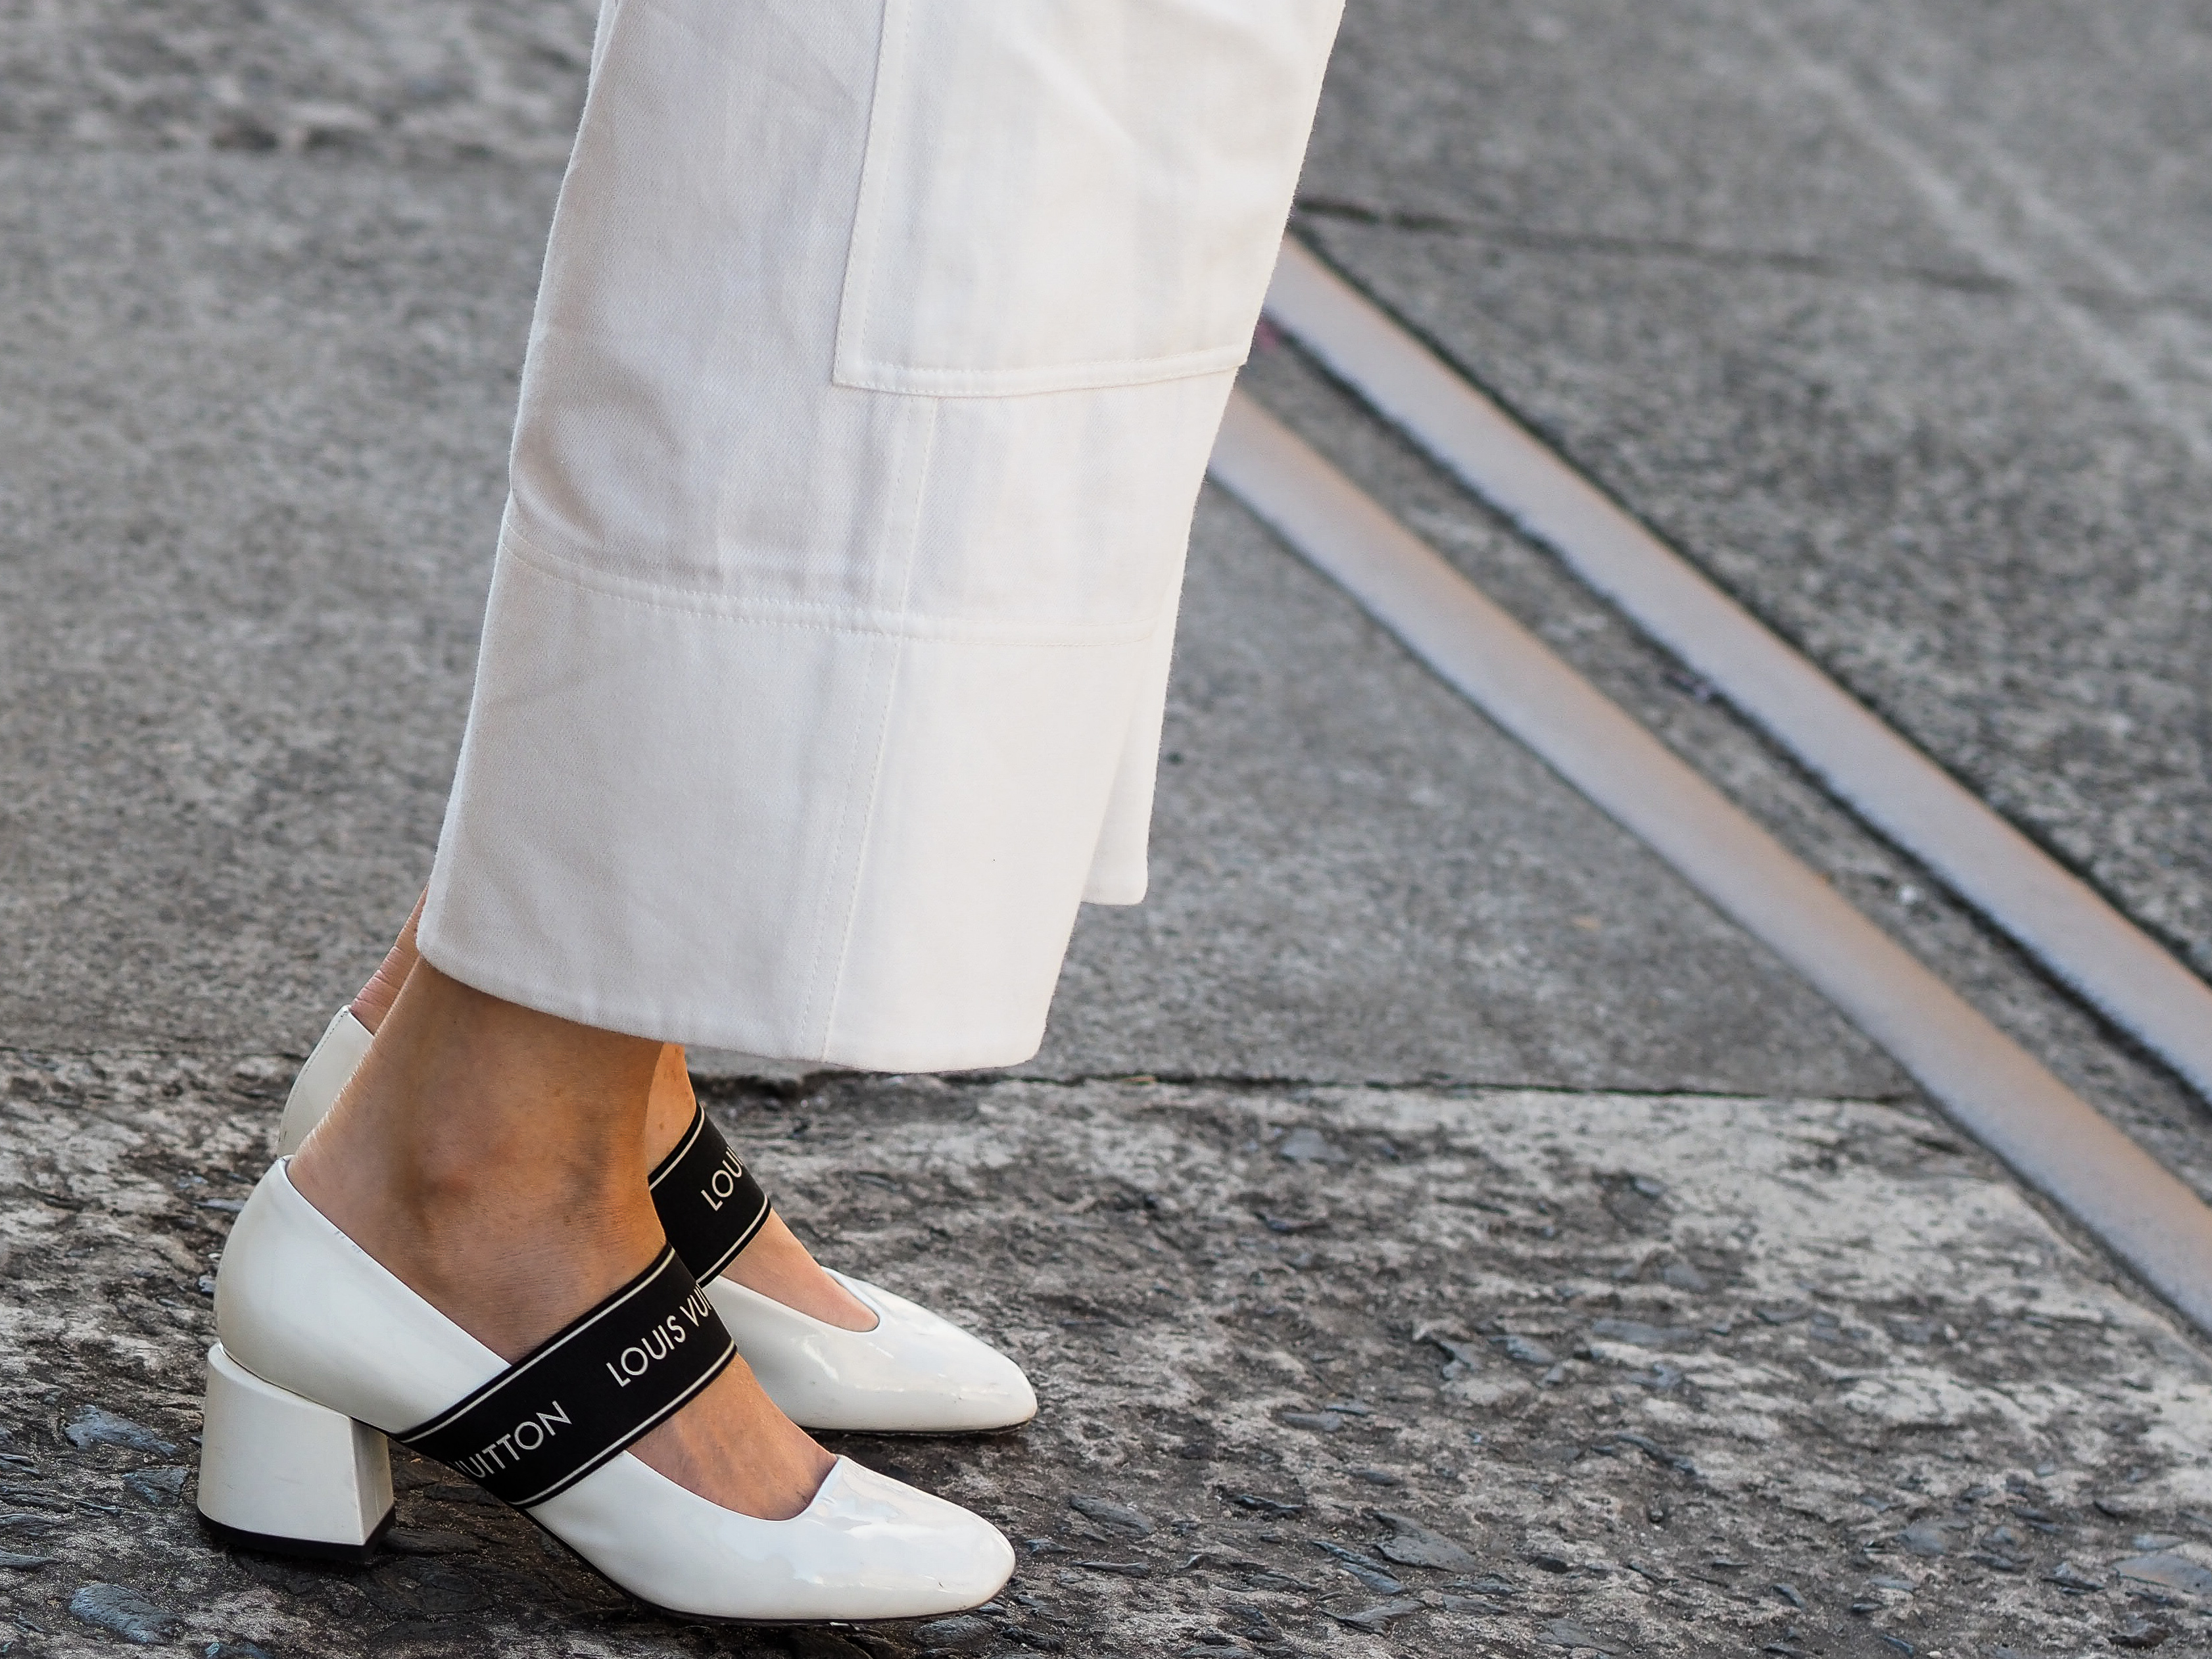 MBFWA: The Best Street Style From Fashion Week, Day Four - Grazia